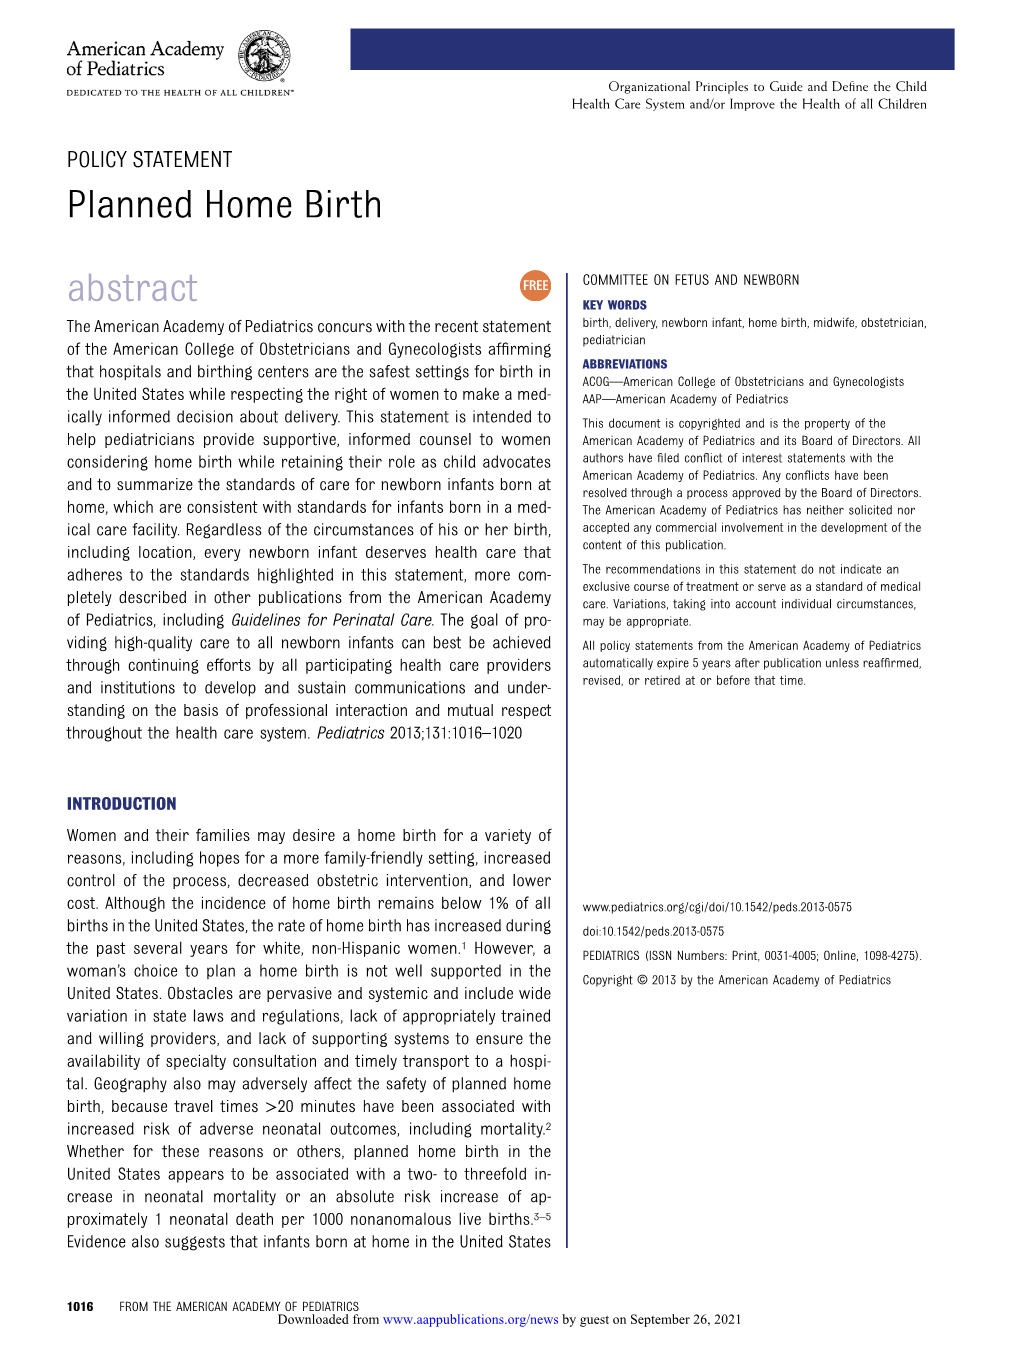 Planned Home Birth Abstract